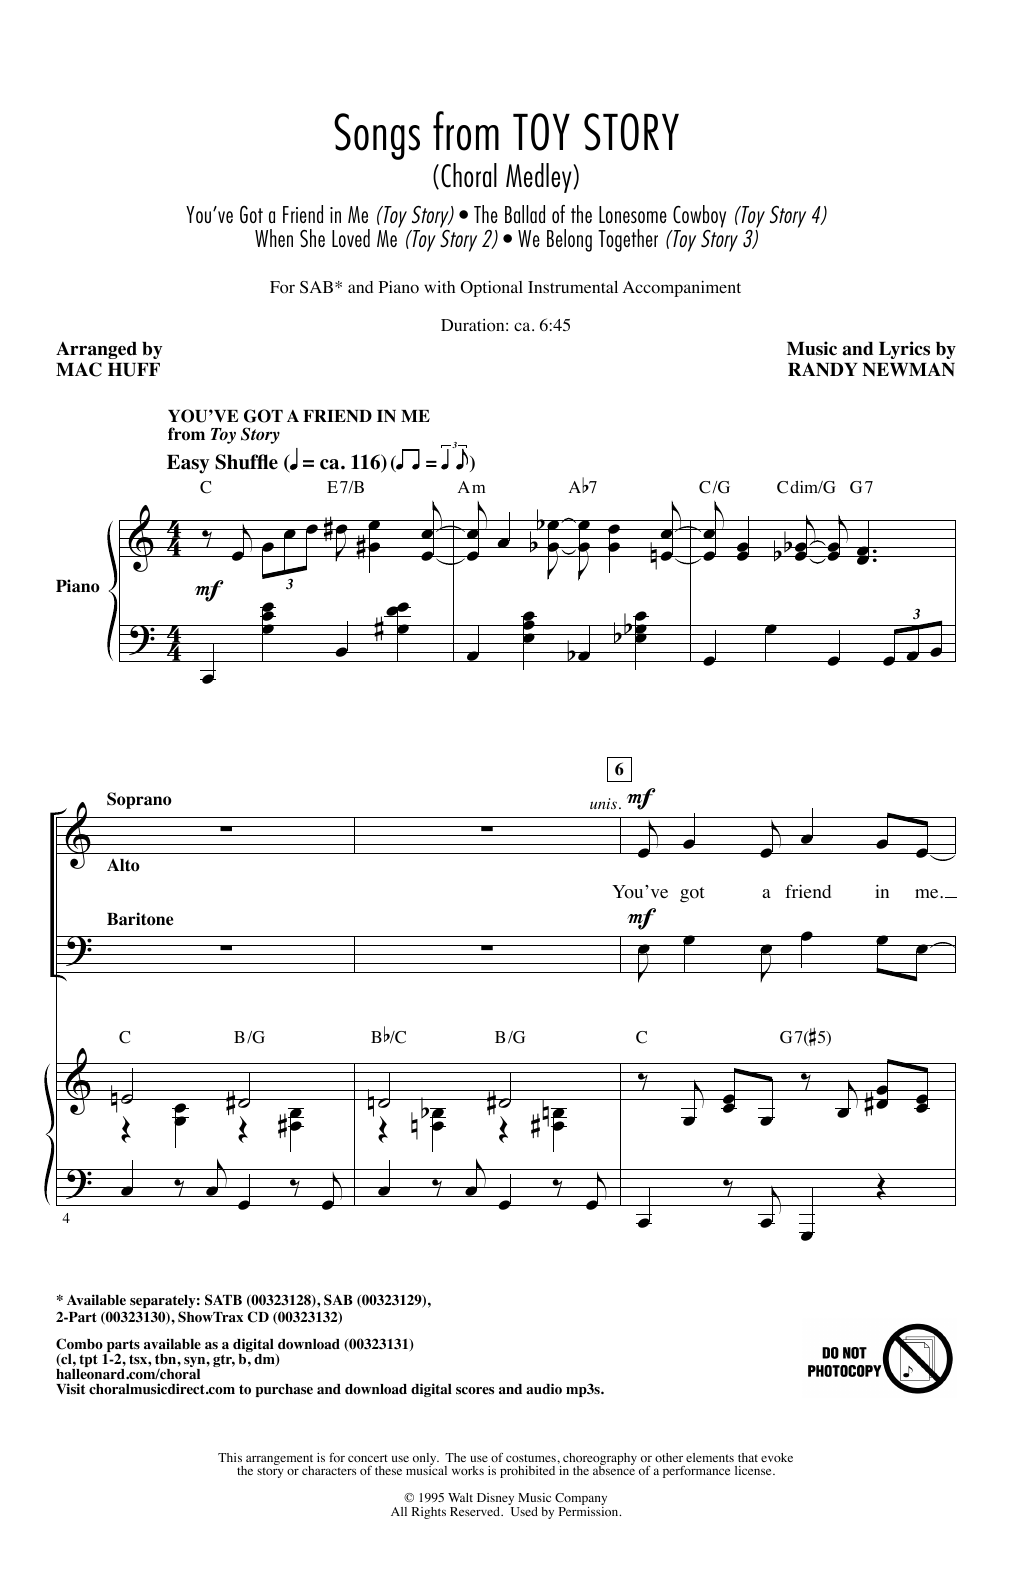 Download Randy Newman Songs from Toy Story (Choral Medley) (a Sheet Music